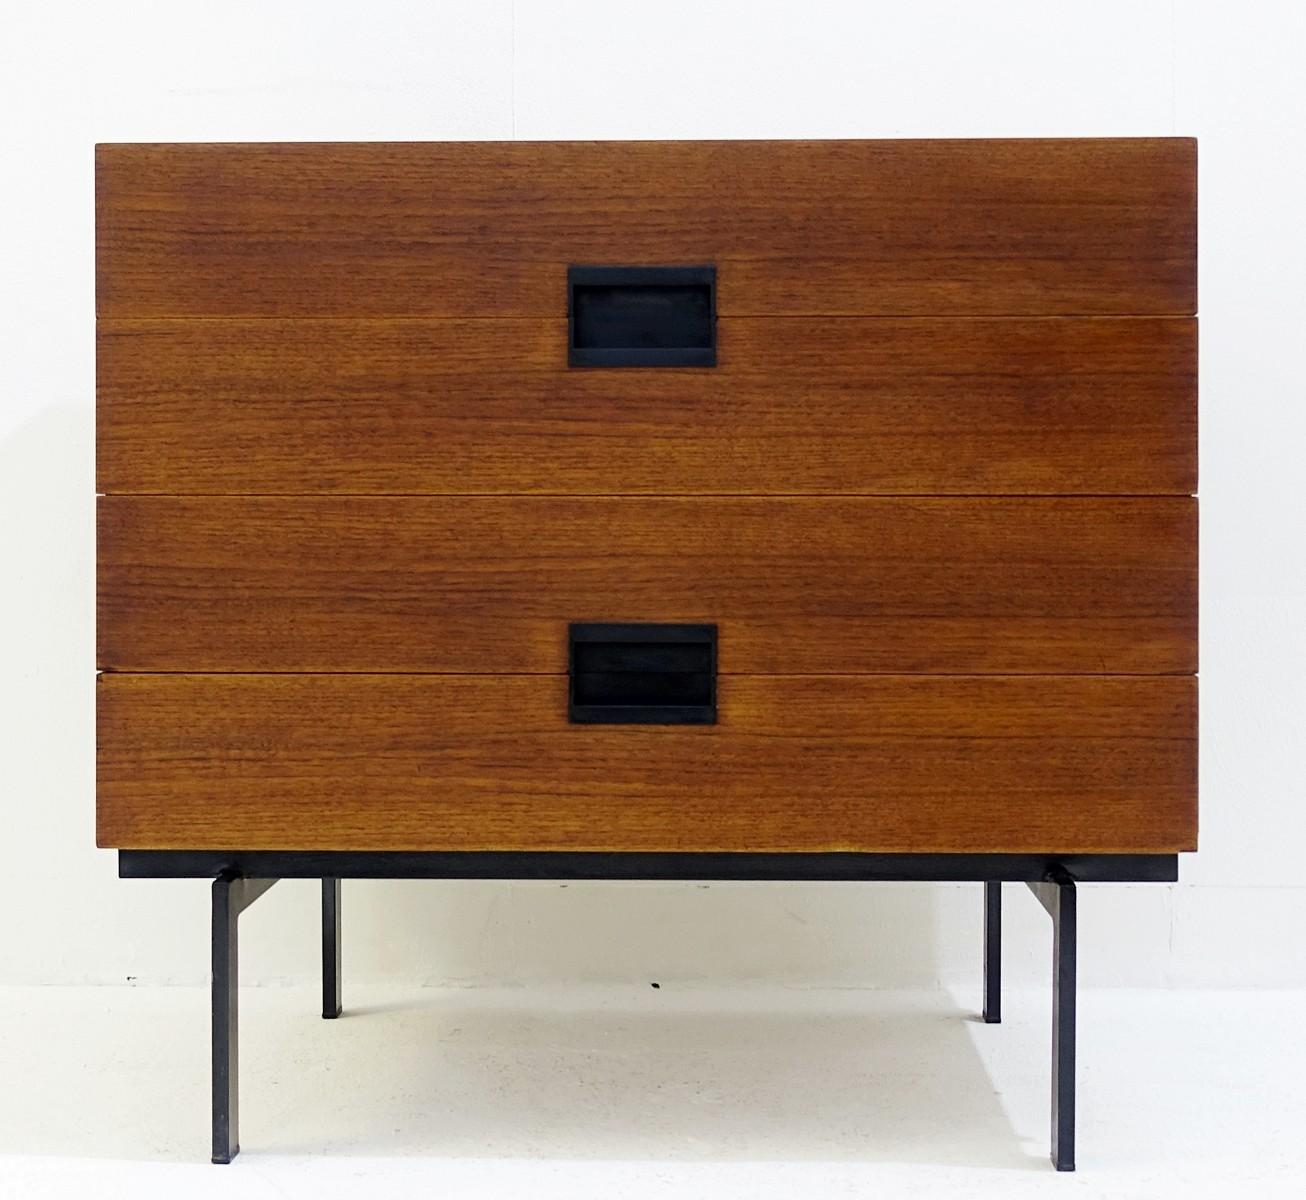 Japanese series chest of drawers by Cees Braakman for Pastoe, 1950s.